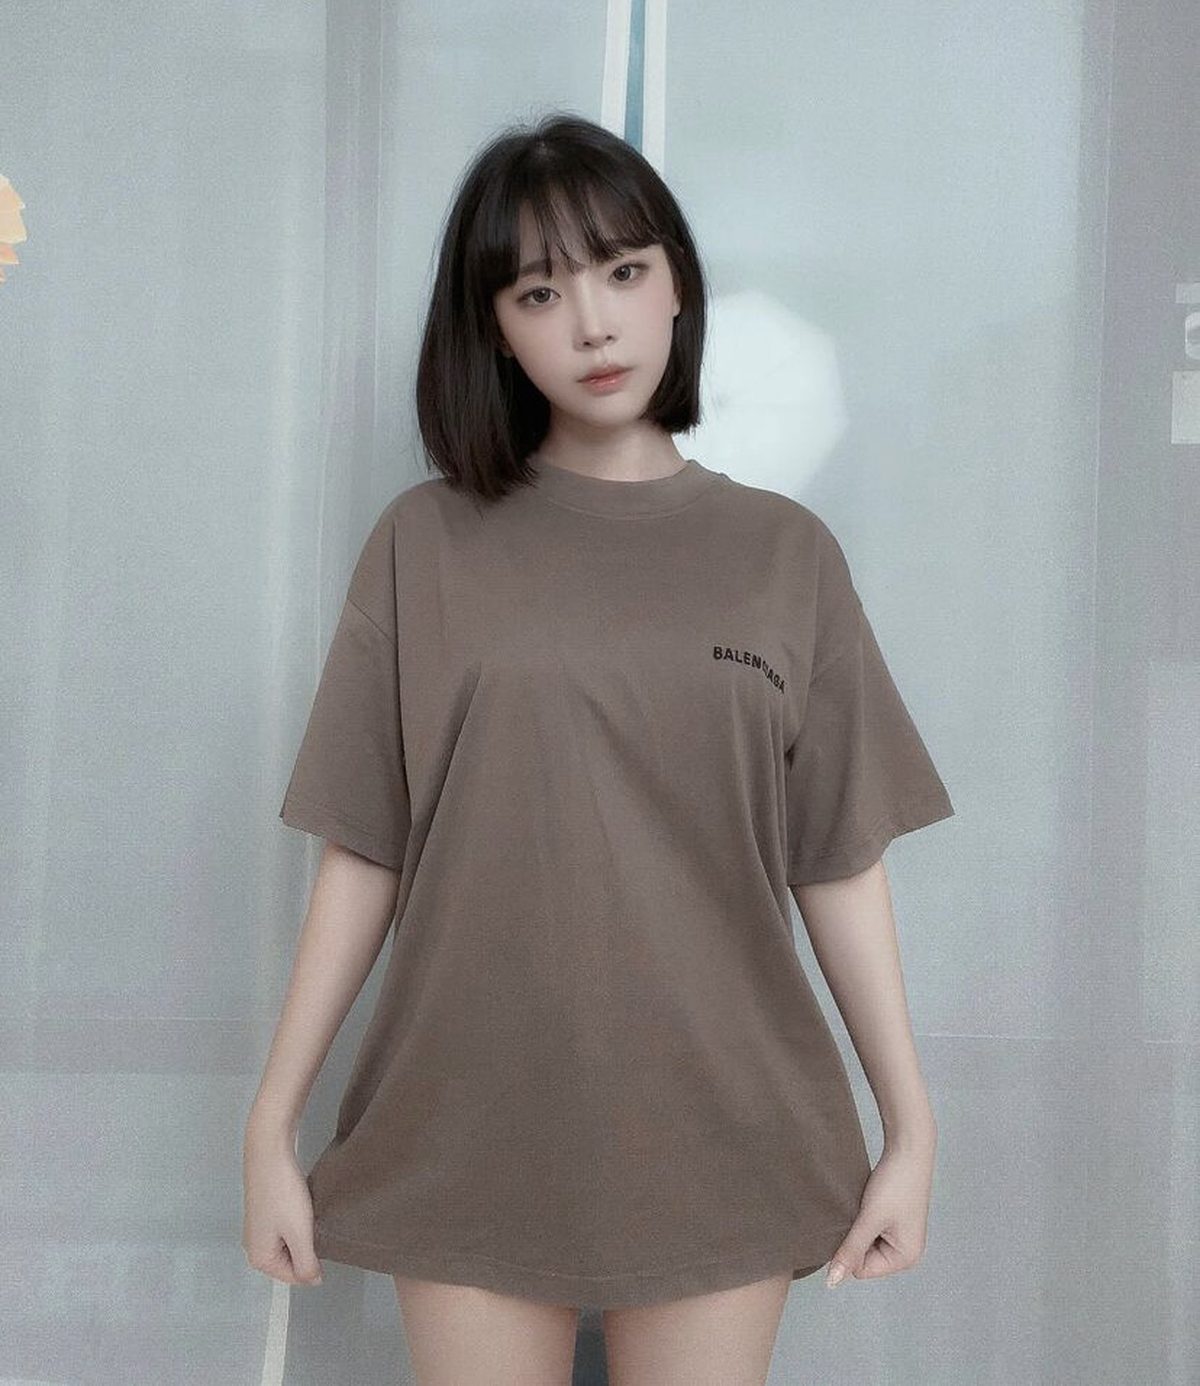 Kang In kyung 강인경 Collection E 0021 3947919245.jpg